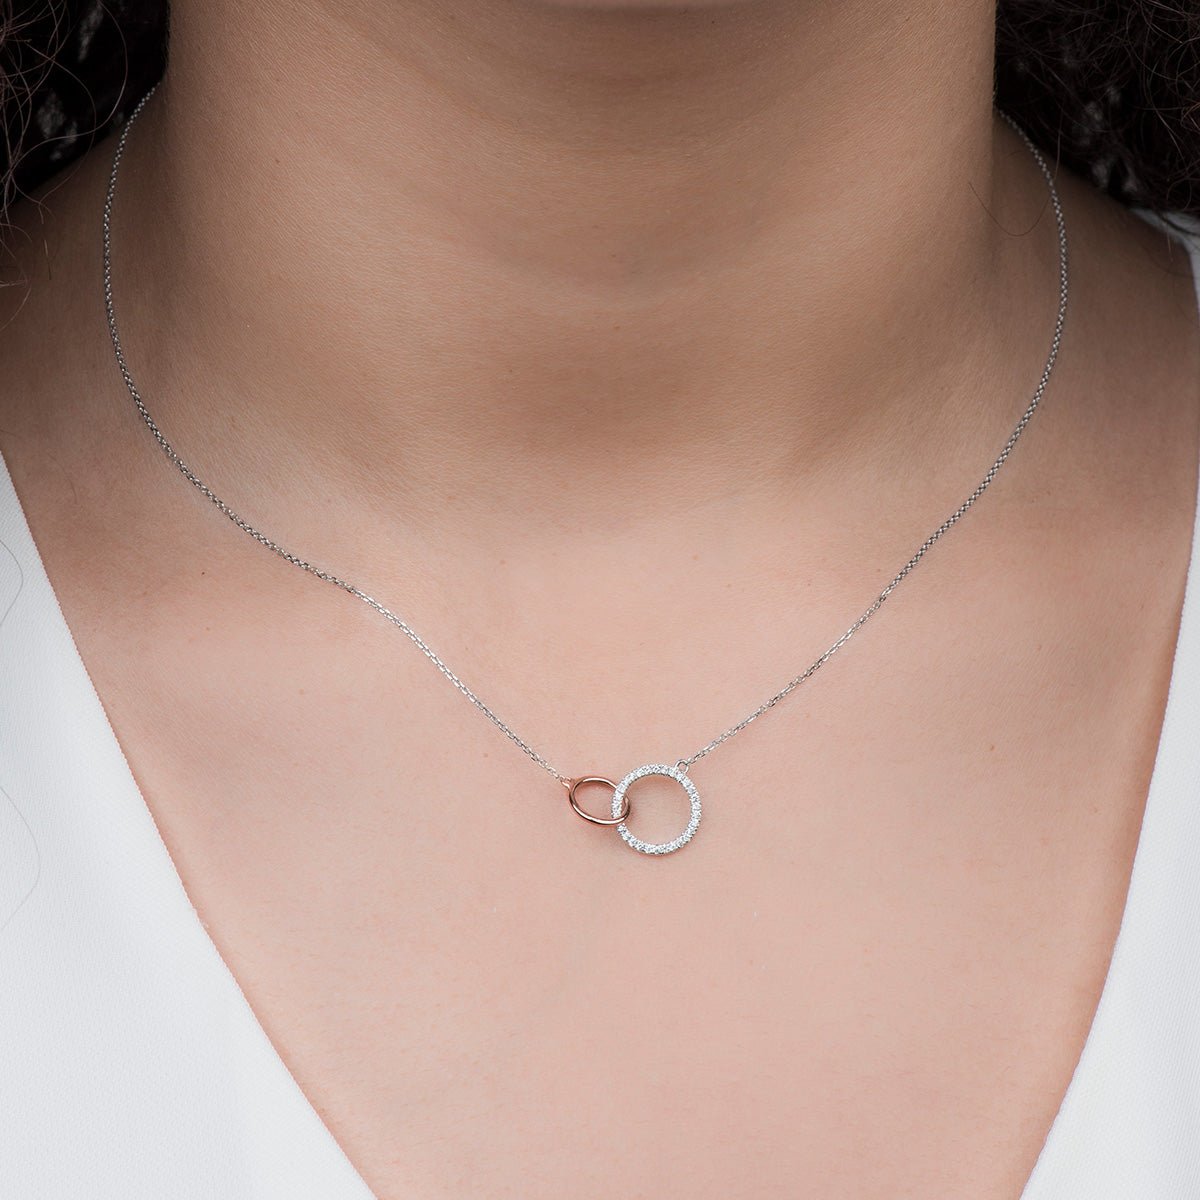 Interlocking Circles Diamond Necklace in Solid 14k Two-Tone White and Rose Gold Necklaces Estella Collection #product_description# 14k Diamond Gemstone #tag4# #tag5# #tag6# #tag7# #tag8# #tag9# #tag10#